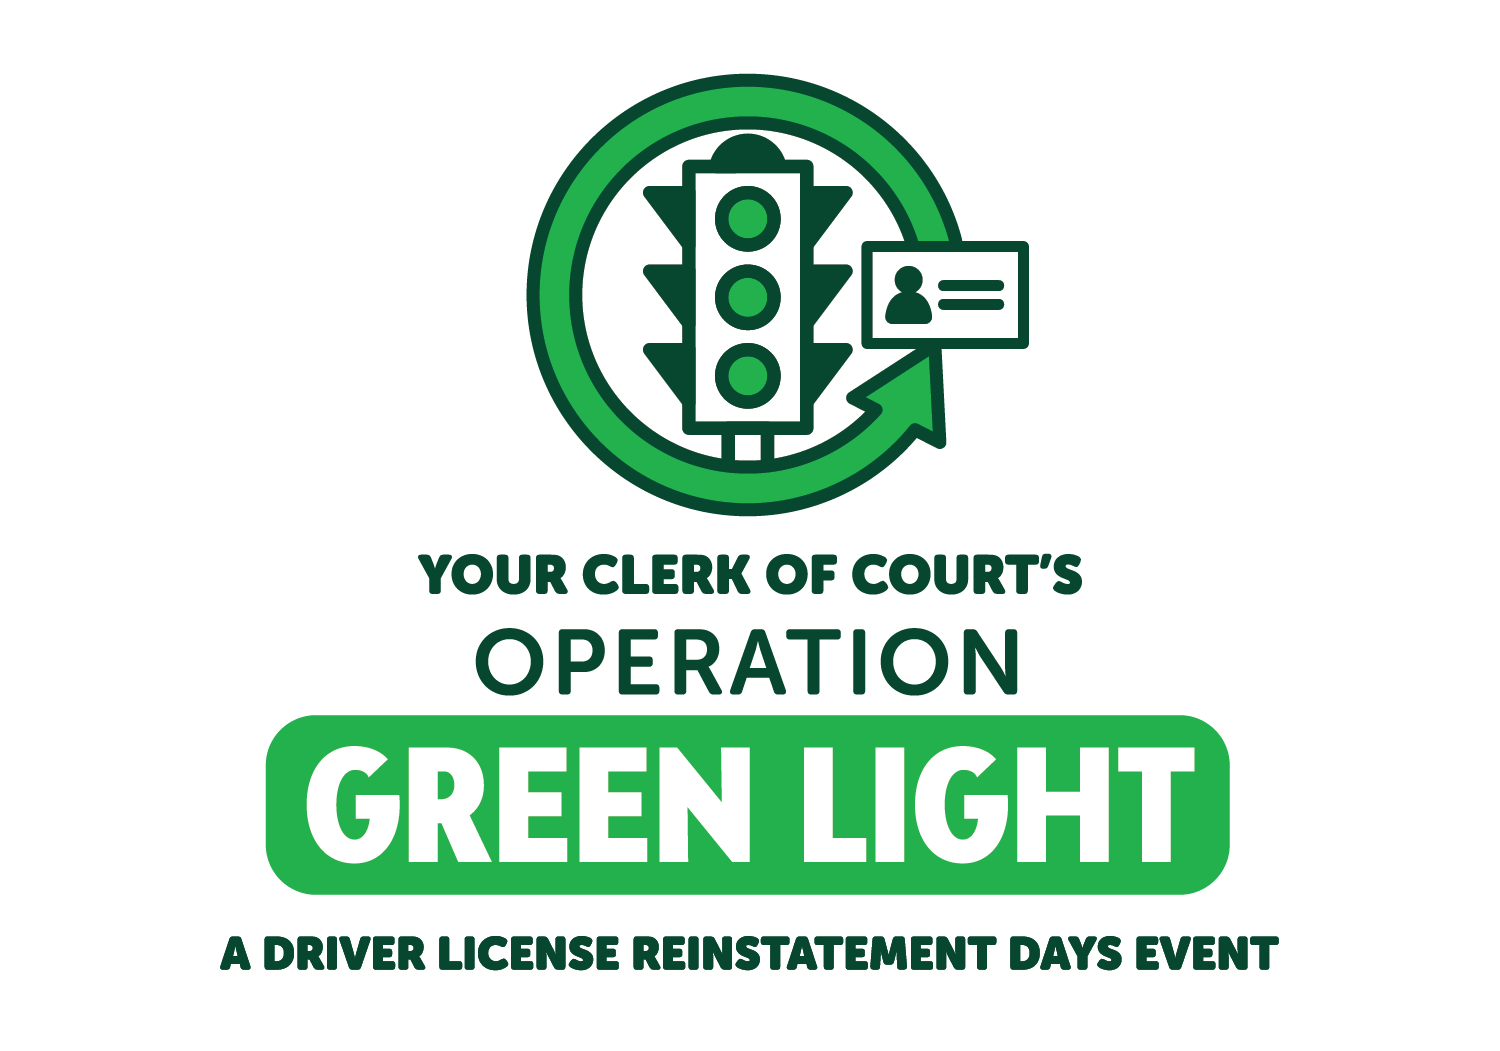 Suspended License? Save Money - Get Back on the Road. This is your chance to save on fees for overdue court obligations and get your license back.
                             Your Clerk of Courts operation green light.  A drivers license reinstatement days event